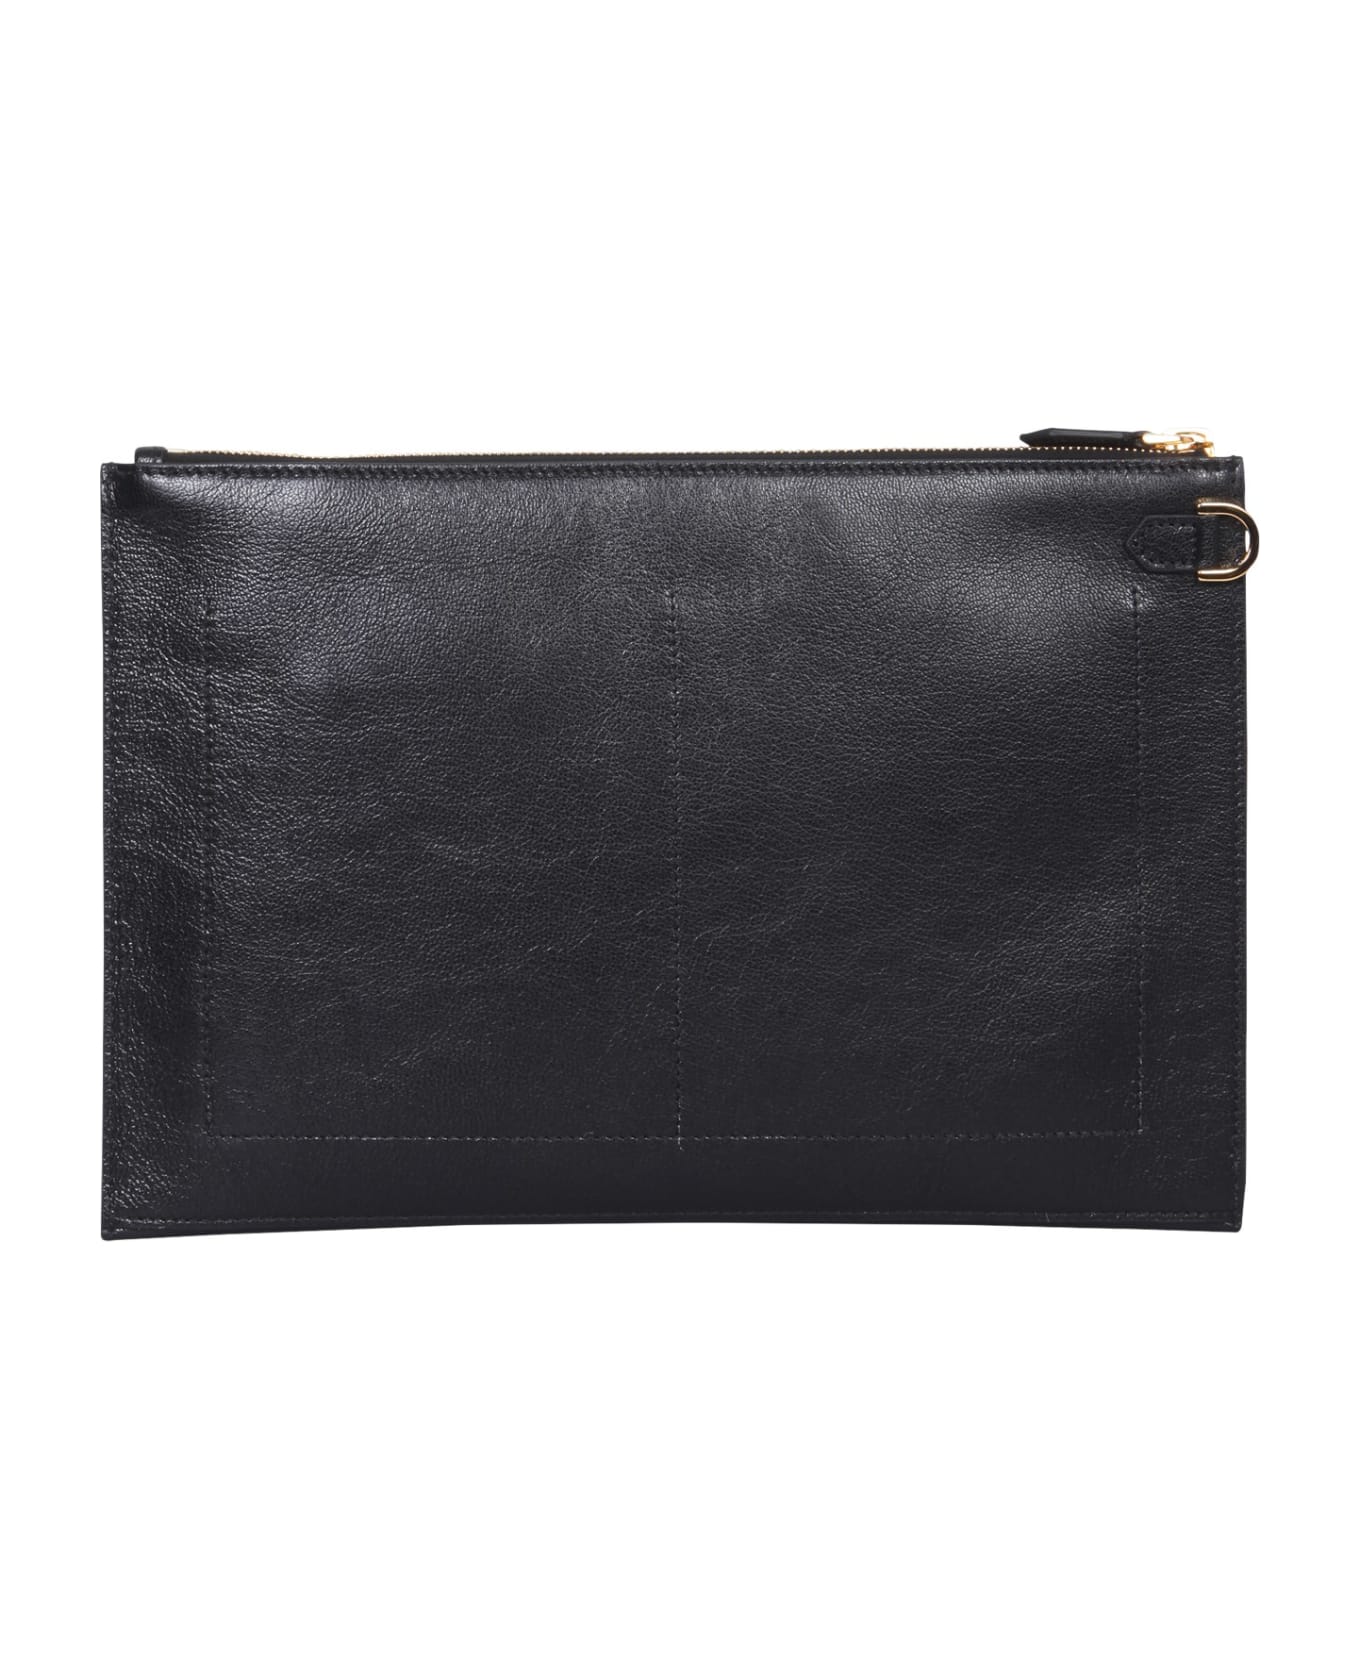 Tom Ford Flat Leather Pouch - NERO